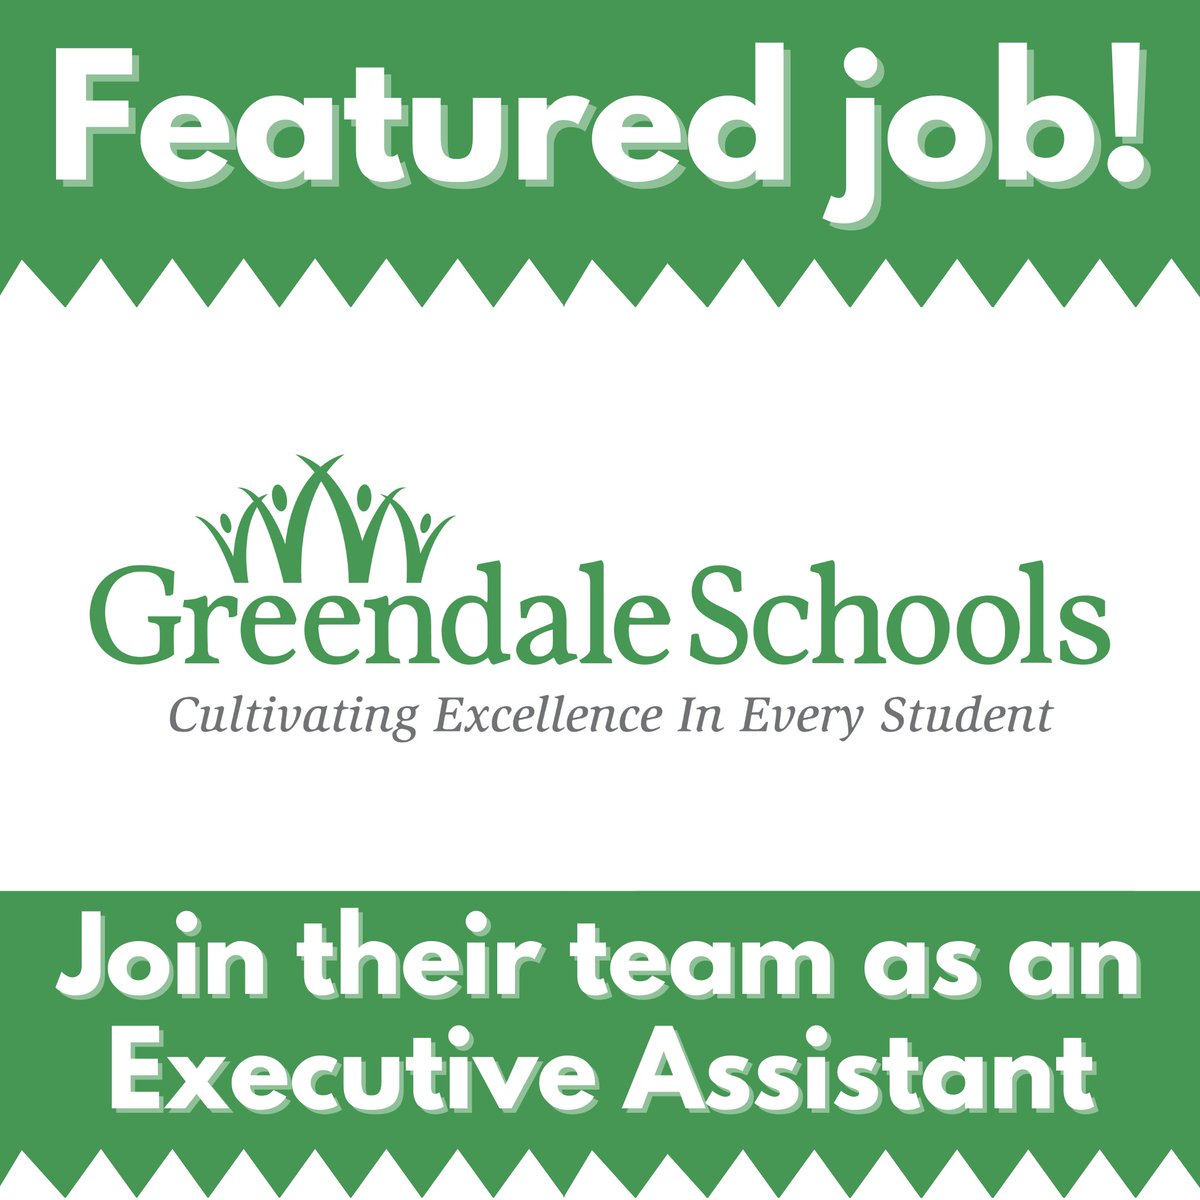 An Executive Assistant (learn more or apply 👉 tinyurl.com/4u4hjj2k) is sought in #Greendale by @GreendaleLearns. $58K-$62K salary—apply today for this important #job opening!

#NonprofitJobs #GreendaleWI #MKE #MKEjobs #MilwaukeeWI #MilwaukeeJobs #AdministrativeJobs #AdminJobs